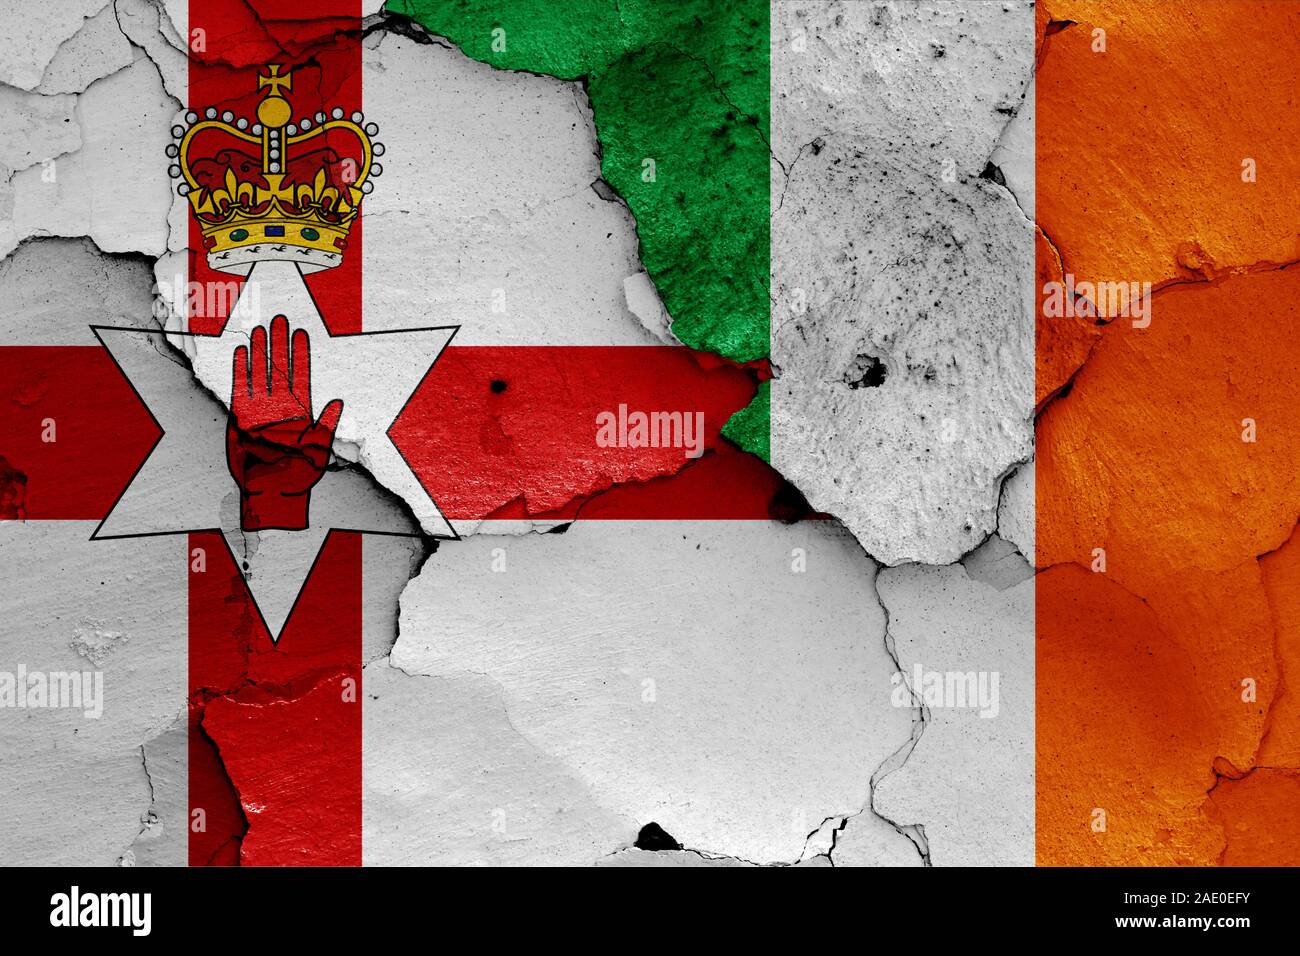 flags of Northern Ireland and Ireland painted on cracked wall Stock Photo